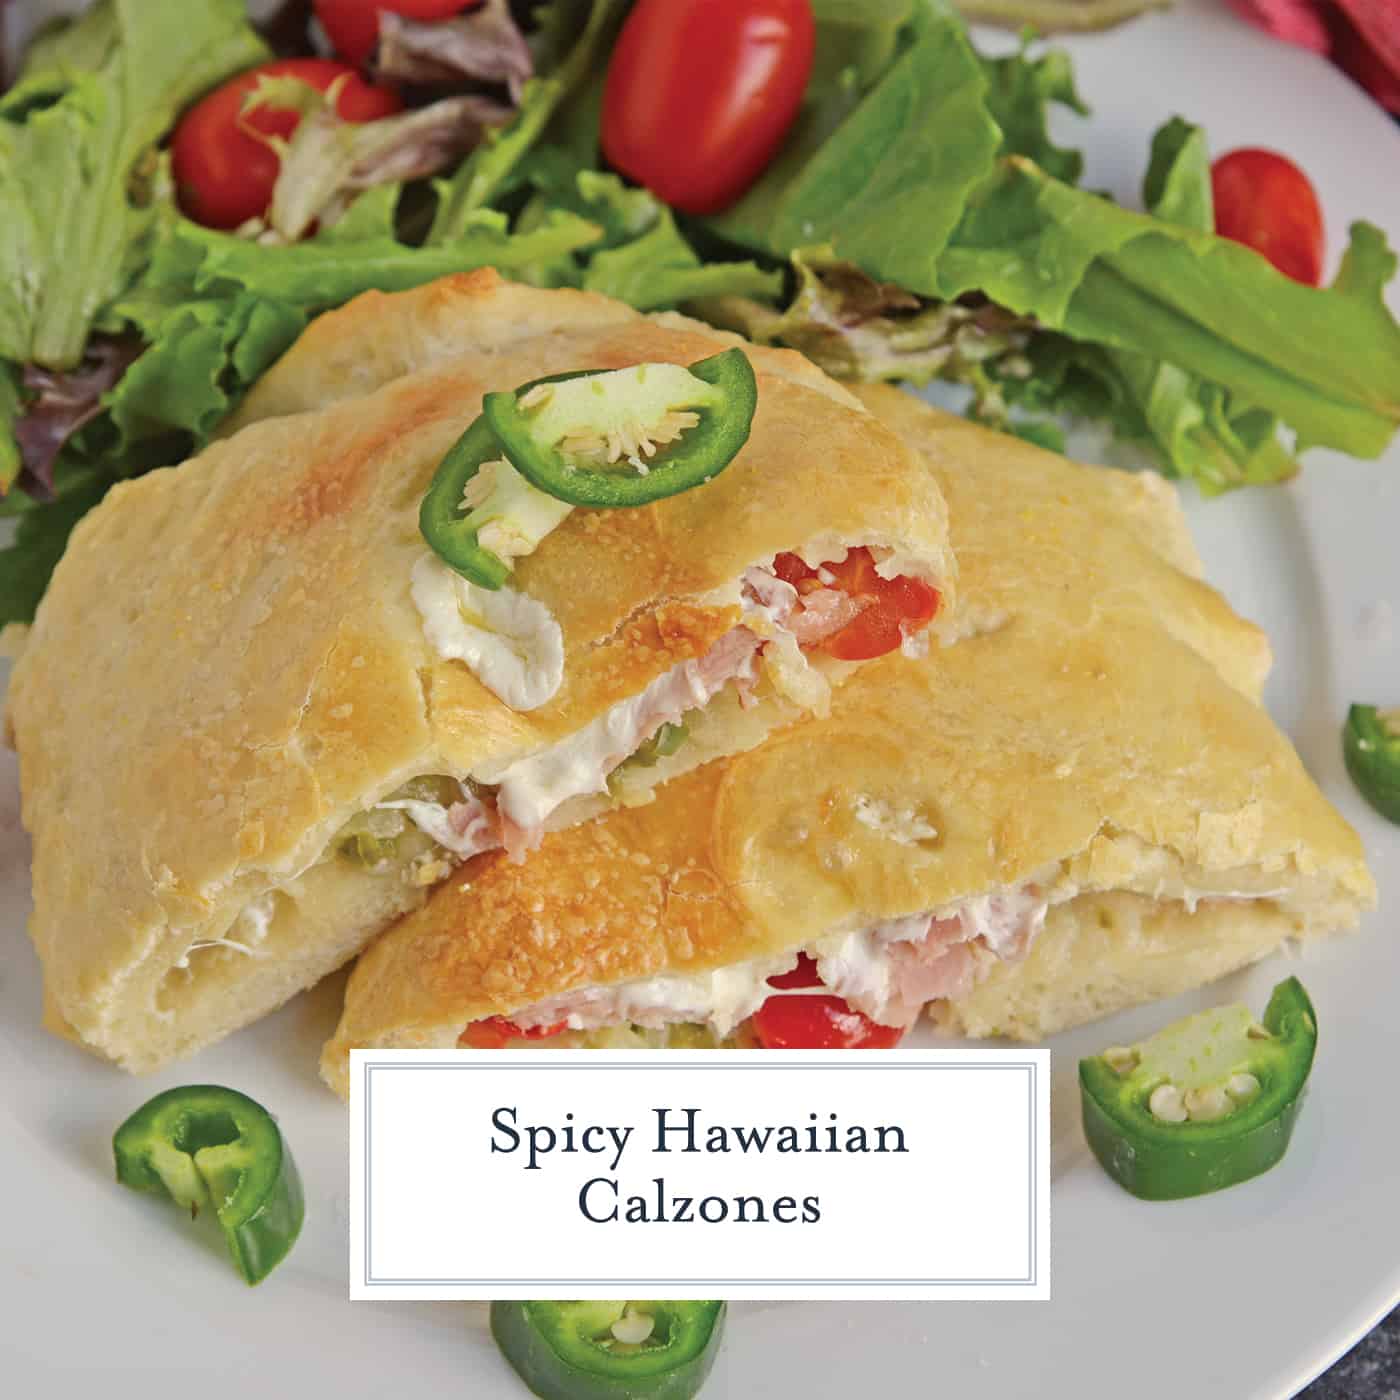 Spicy Hawaiian Calzones have become a favorite lately in this household! This is a easy calzone recipe just like your favorite Hawaiian Pizza with ham, pineapple and jalapenos! #hawaiianpizza #hawaiianfood www.savoryexperiments.com